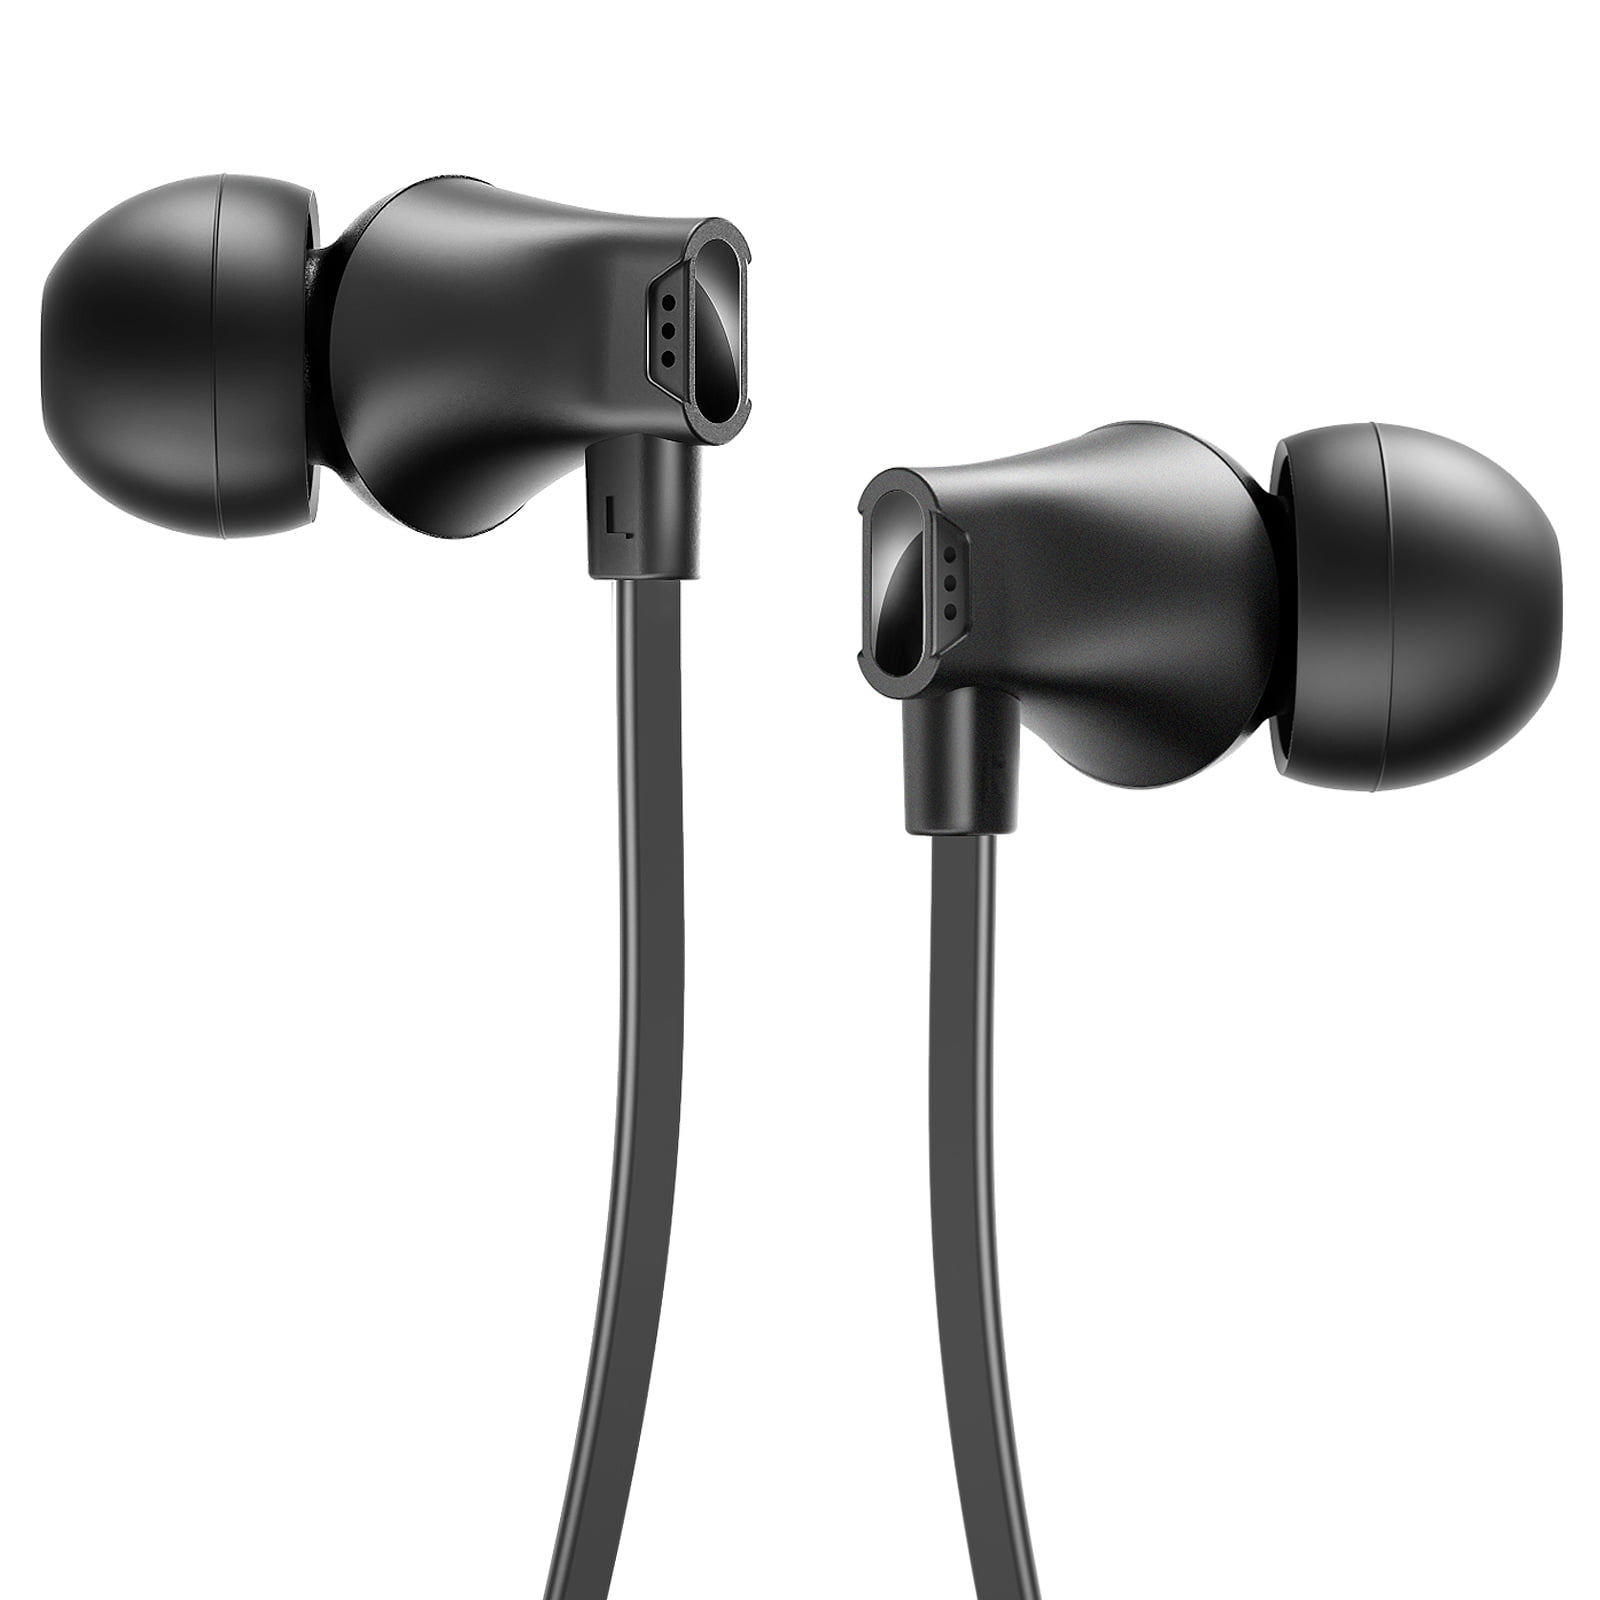 Crystal Clear Sound In-Ear Headphones with Eartips